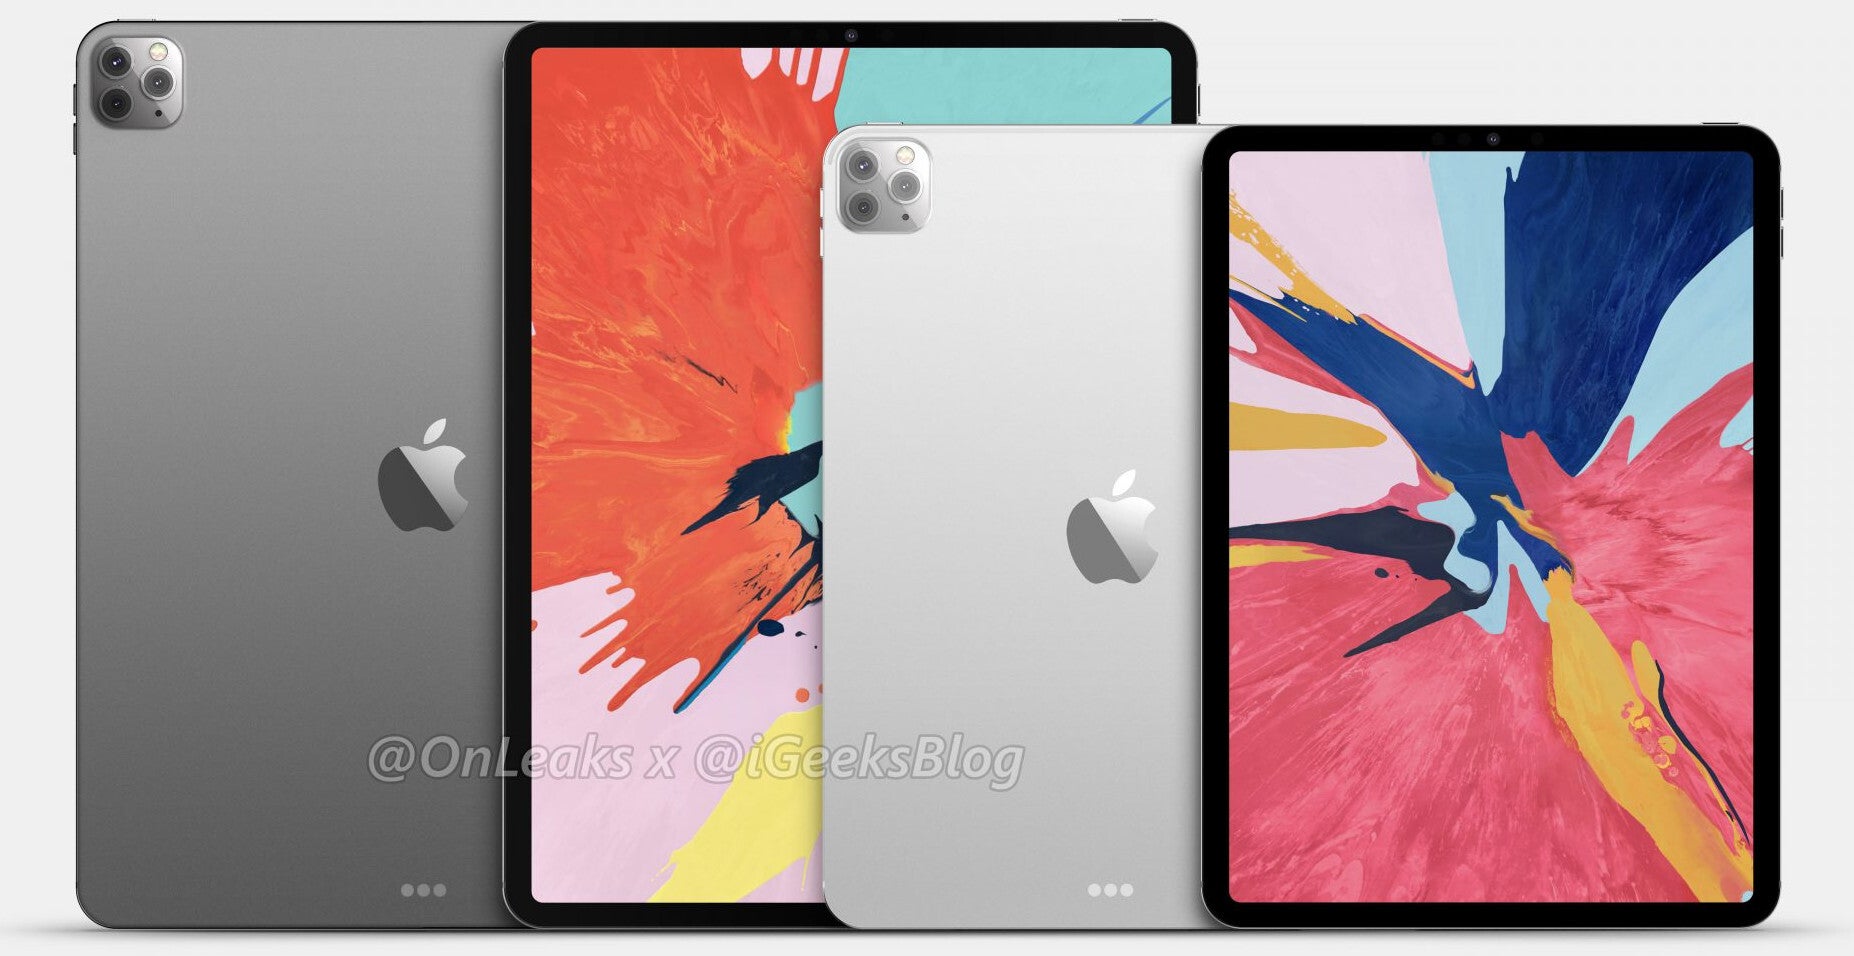 Alleged iPad Pro 2020 family - Here's what the Apple iPad Pro 2020 series (probably) looks like